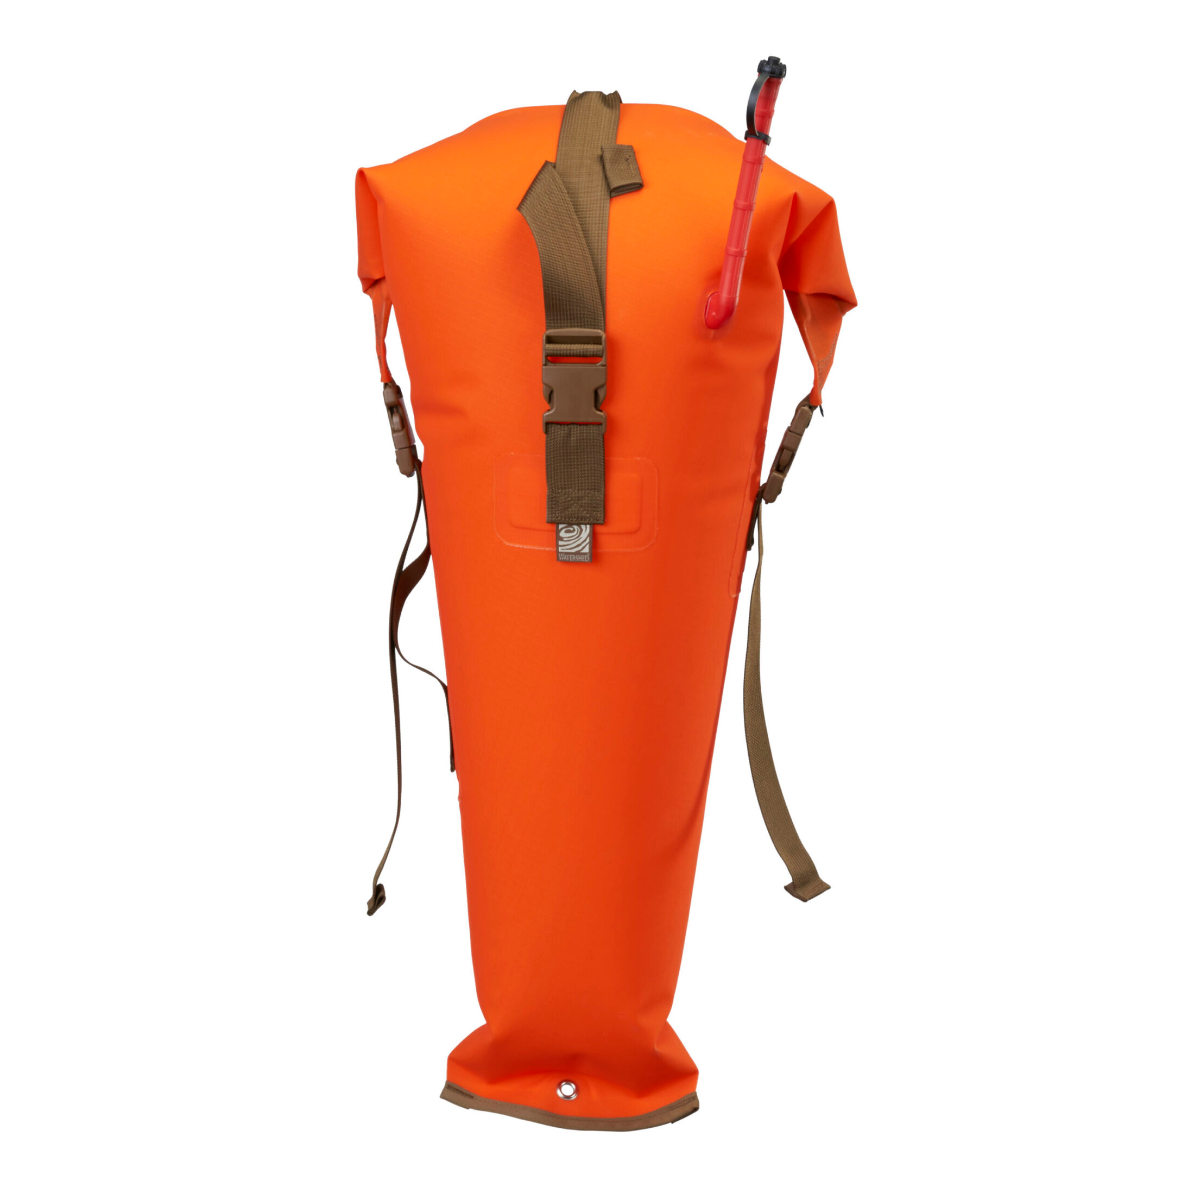 Featuring the Futa Kayak Stow Float dry bag, kayak flotation, kayak outfitting manufactured by Watershed shown here from a third angle.